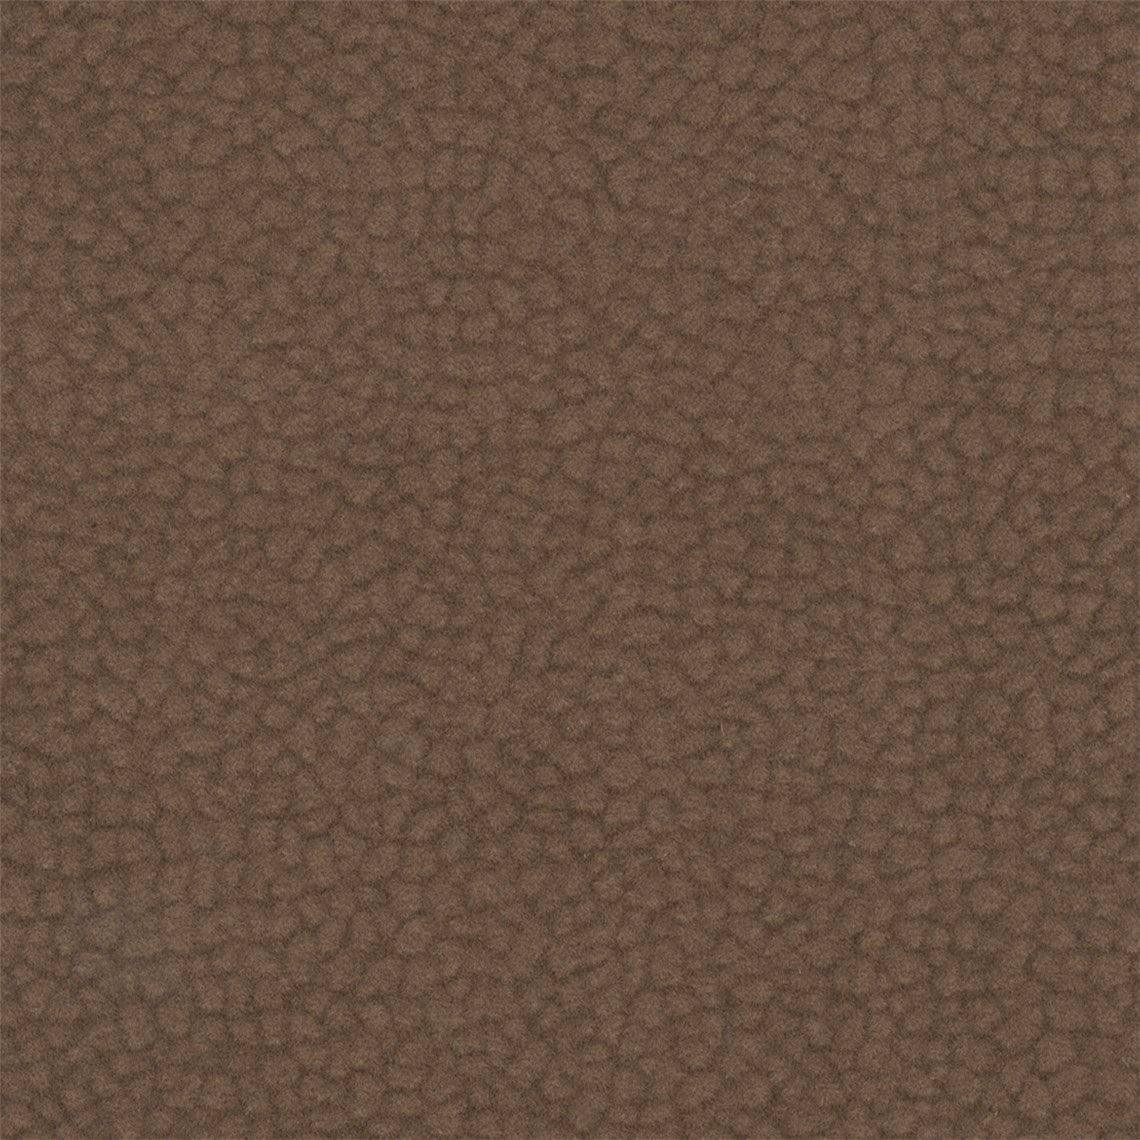 Chocolate Brown Microsuede Fabric - by The Yard